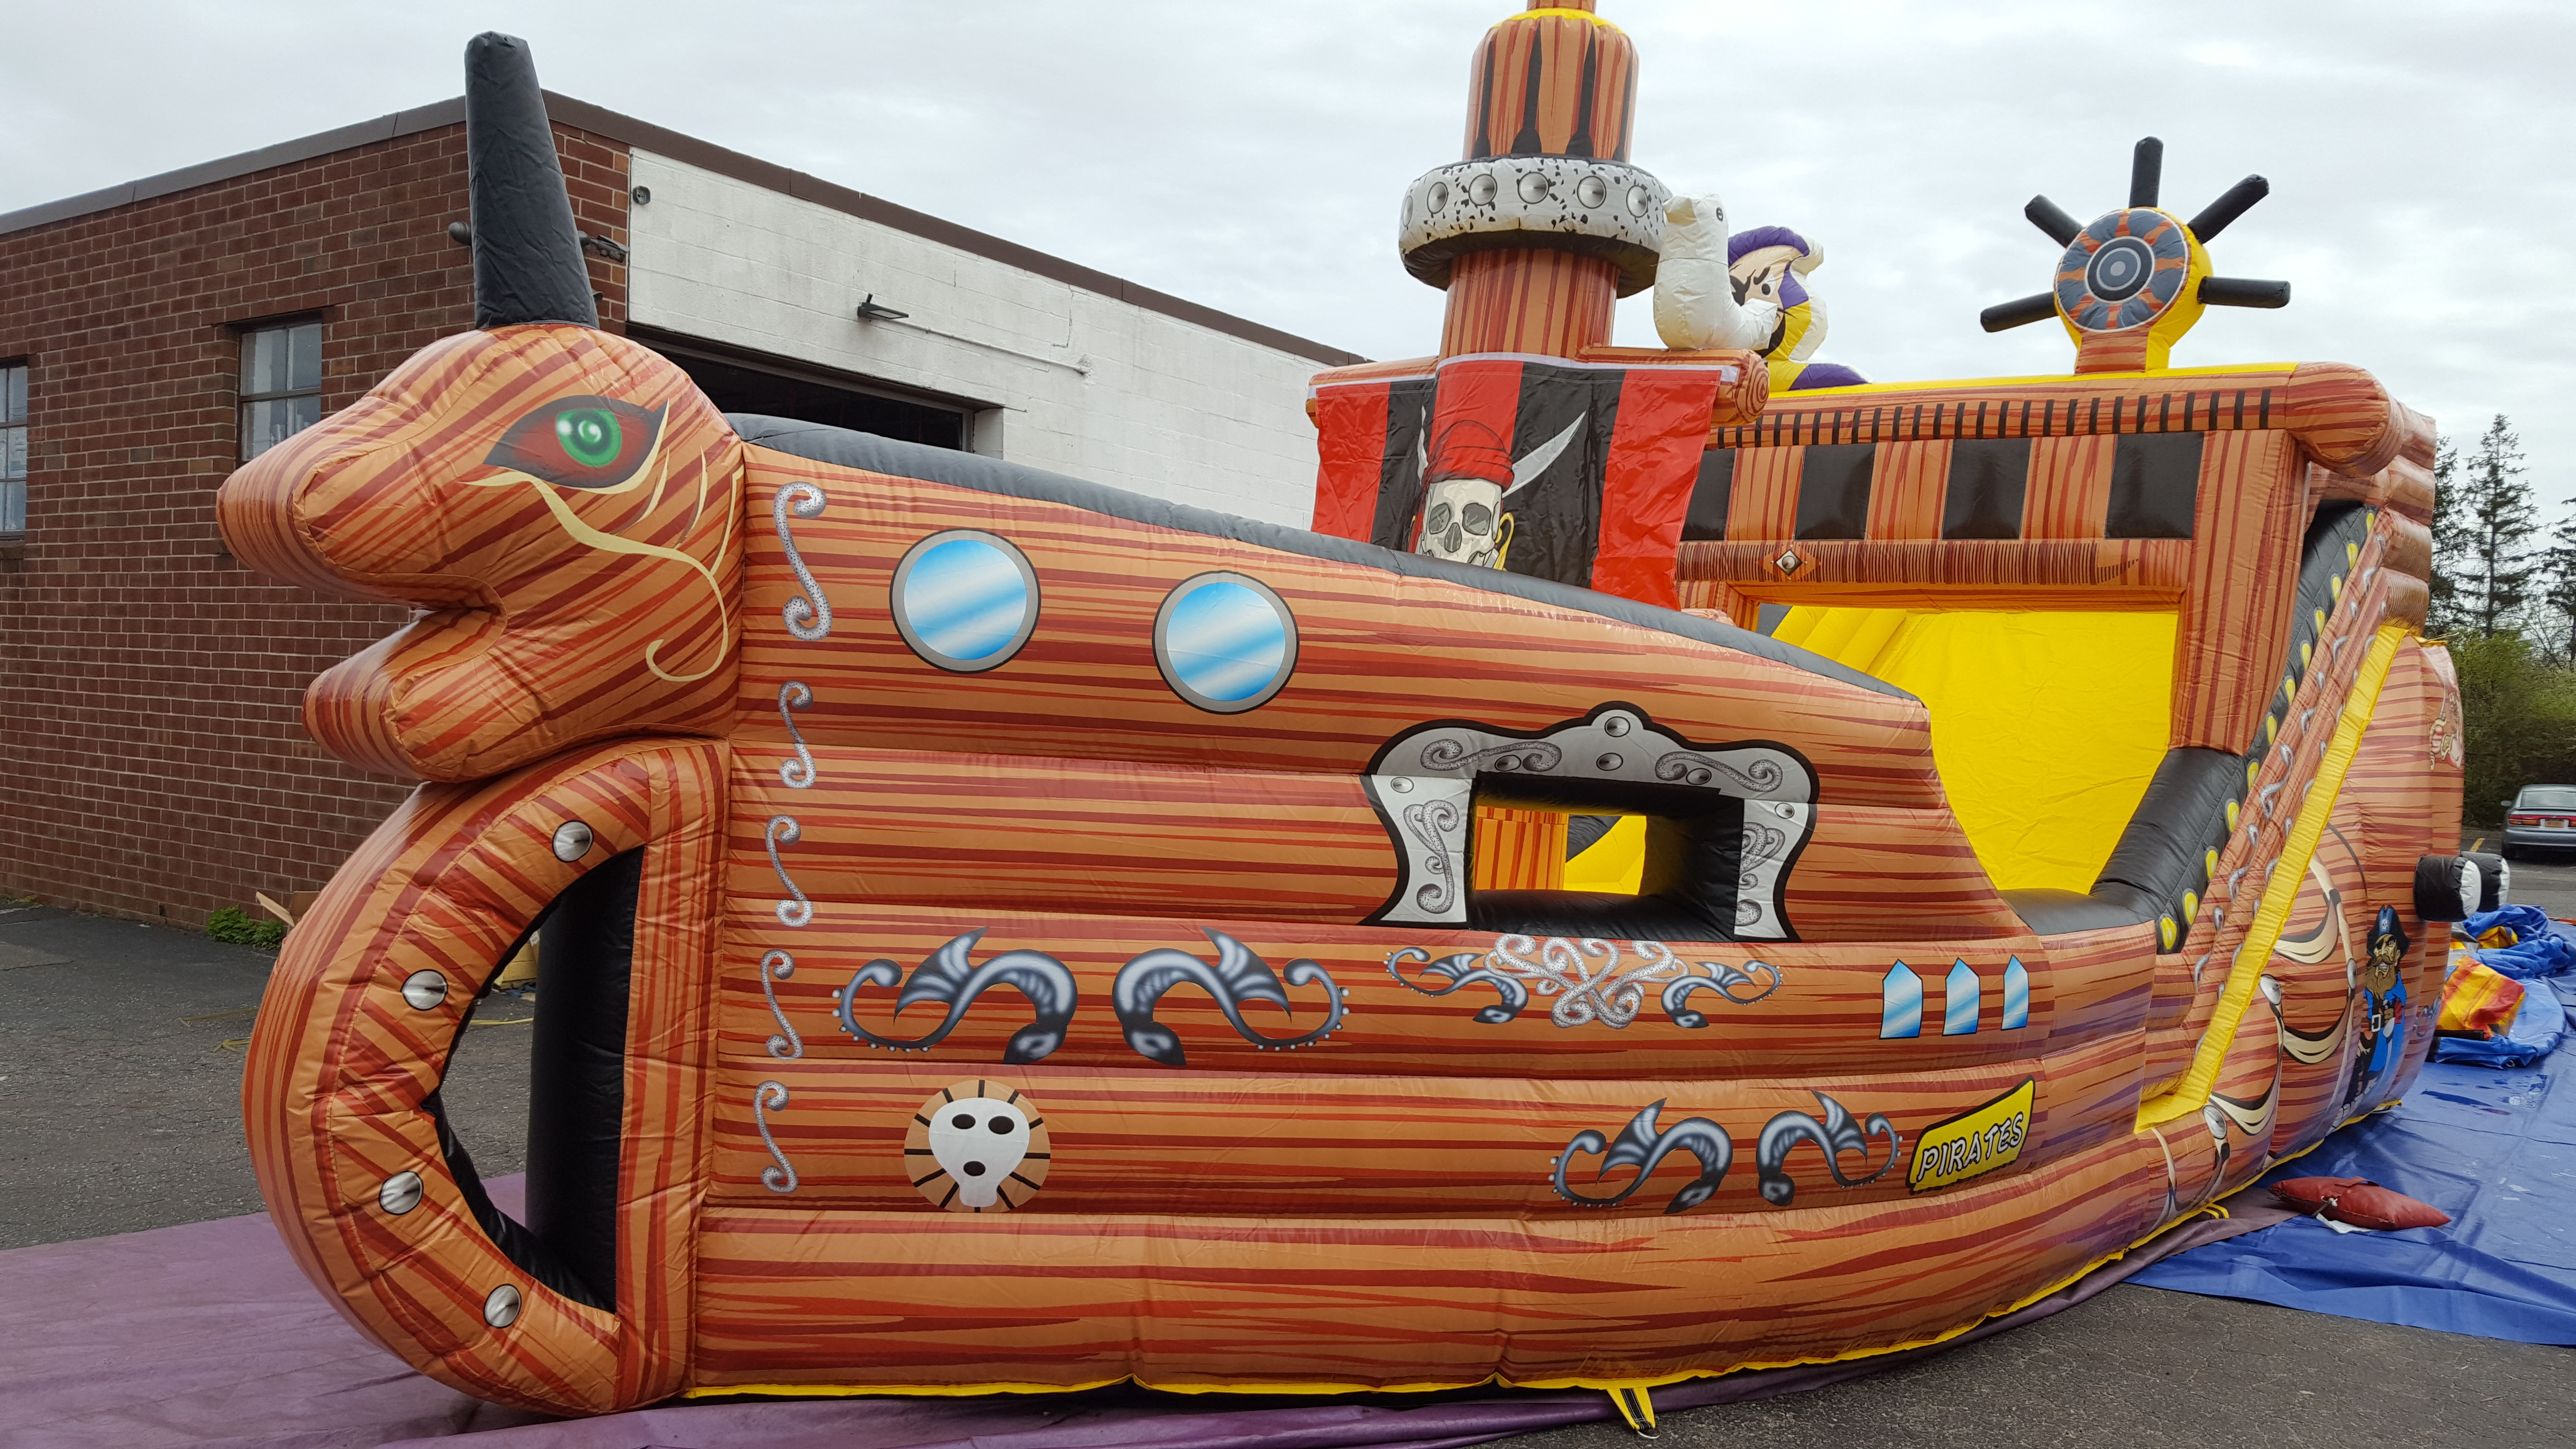 Pirate party rentals? We have the perfect Pirate inflatable ship for your party..Jump And Slide
has the largest selection of themed inflatable party rentals on Long Island